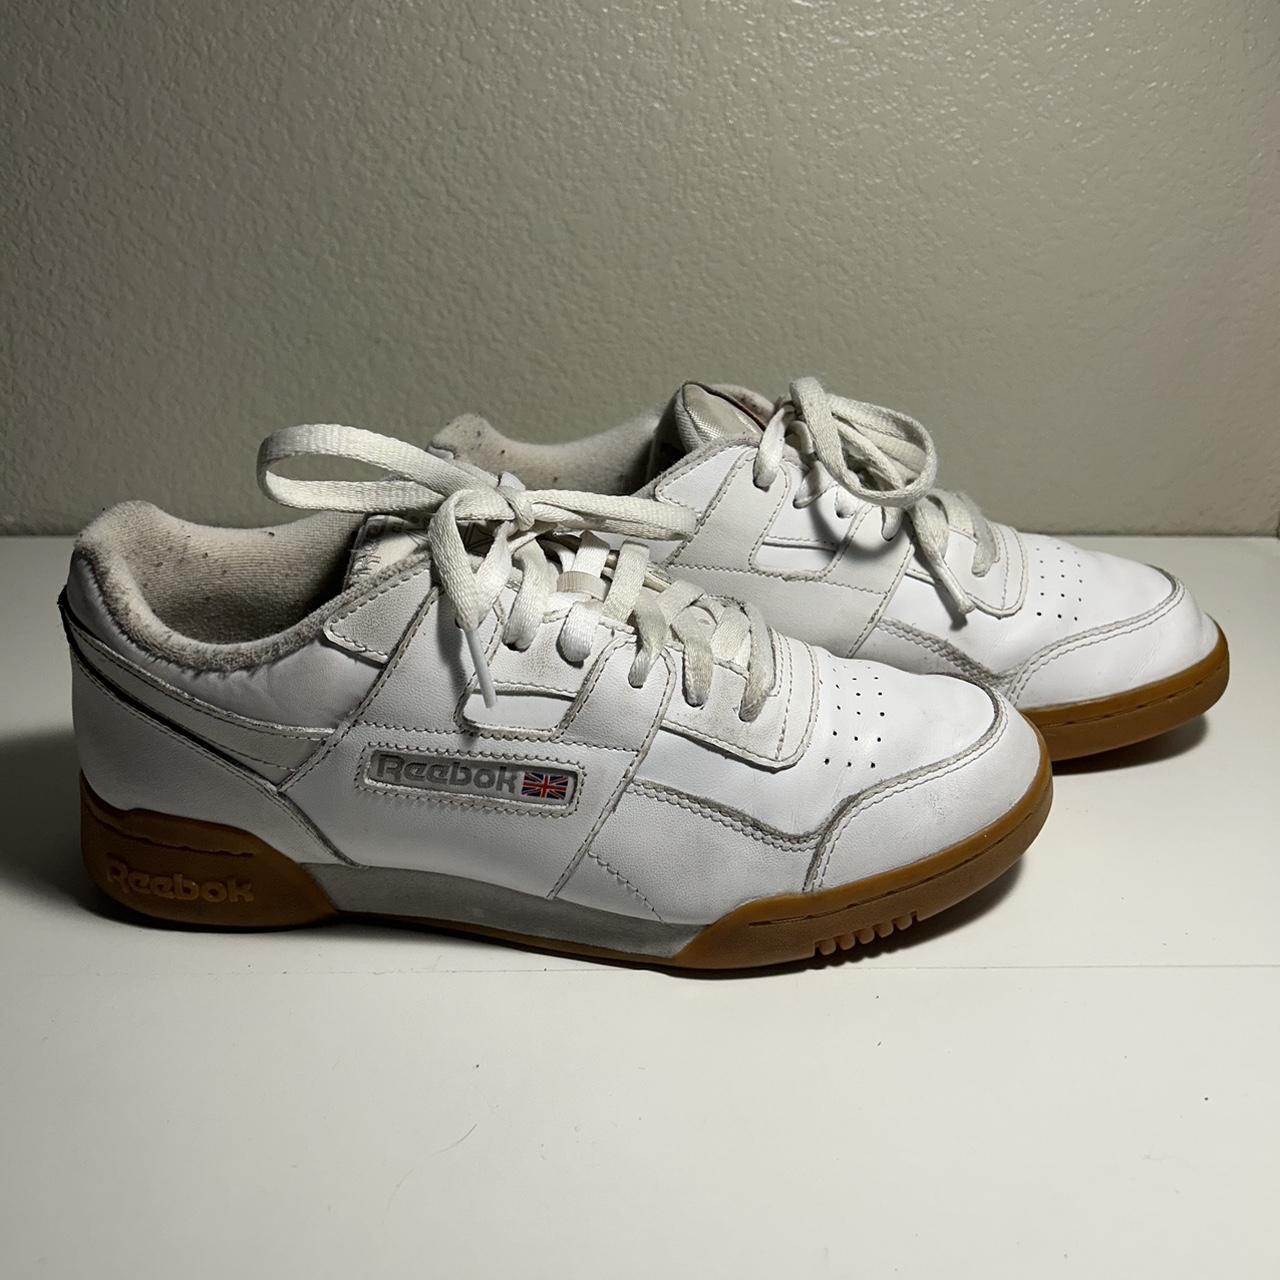 Reebok Women's White and Brown Trainers | Depop